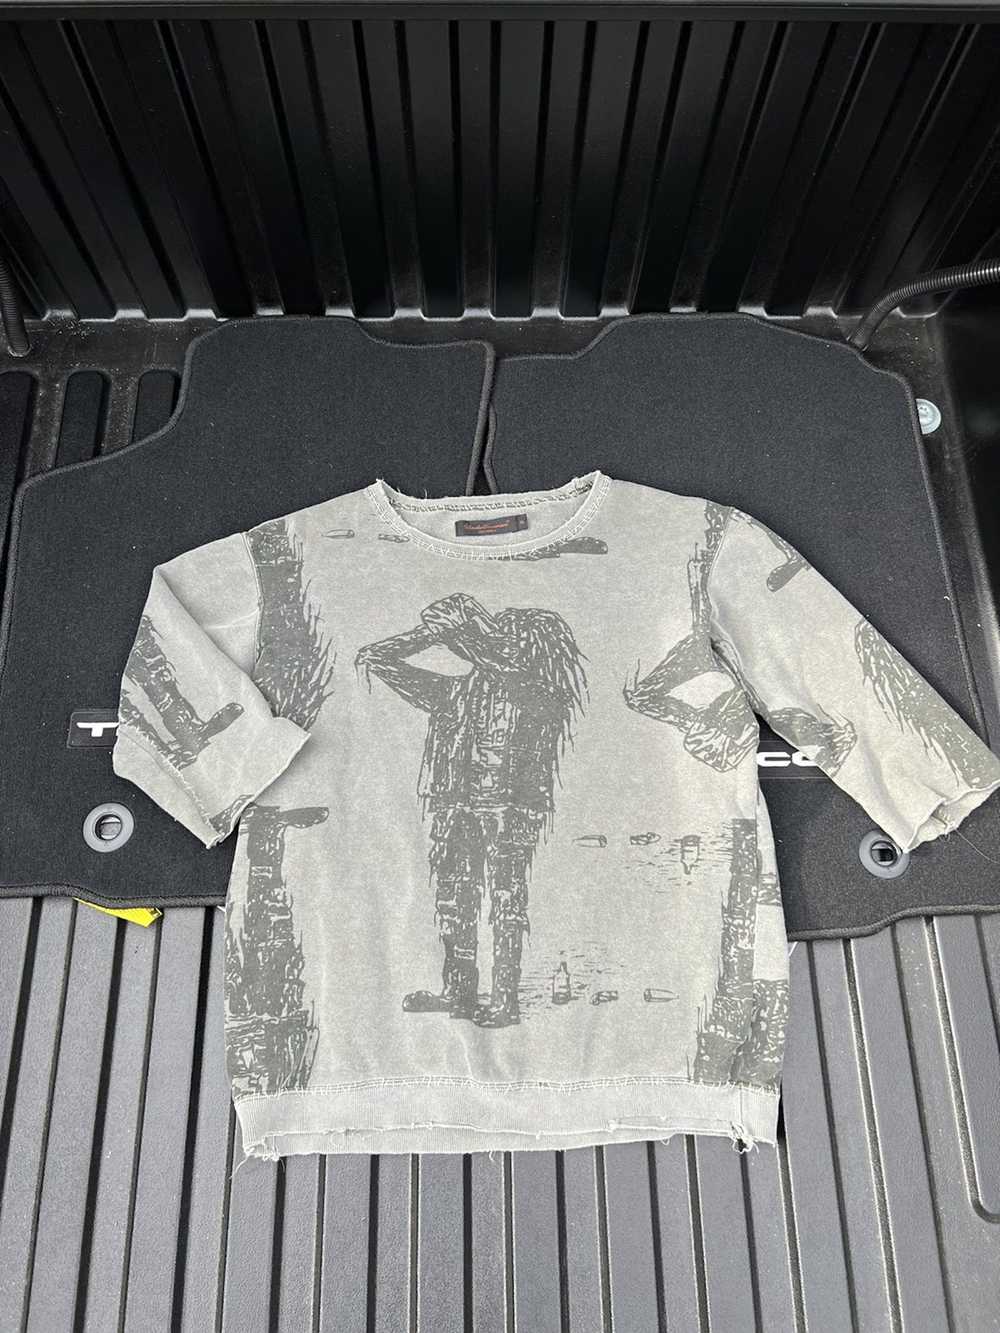 Undercover Undercover SS03 "Scab" Sweater - image 6